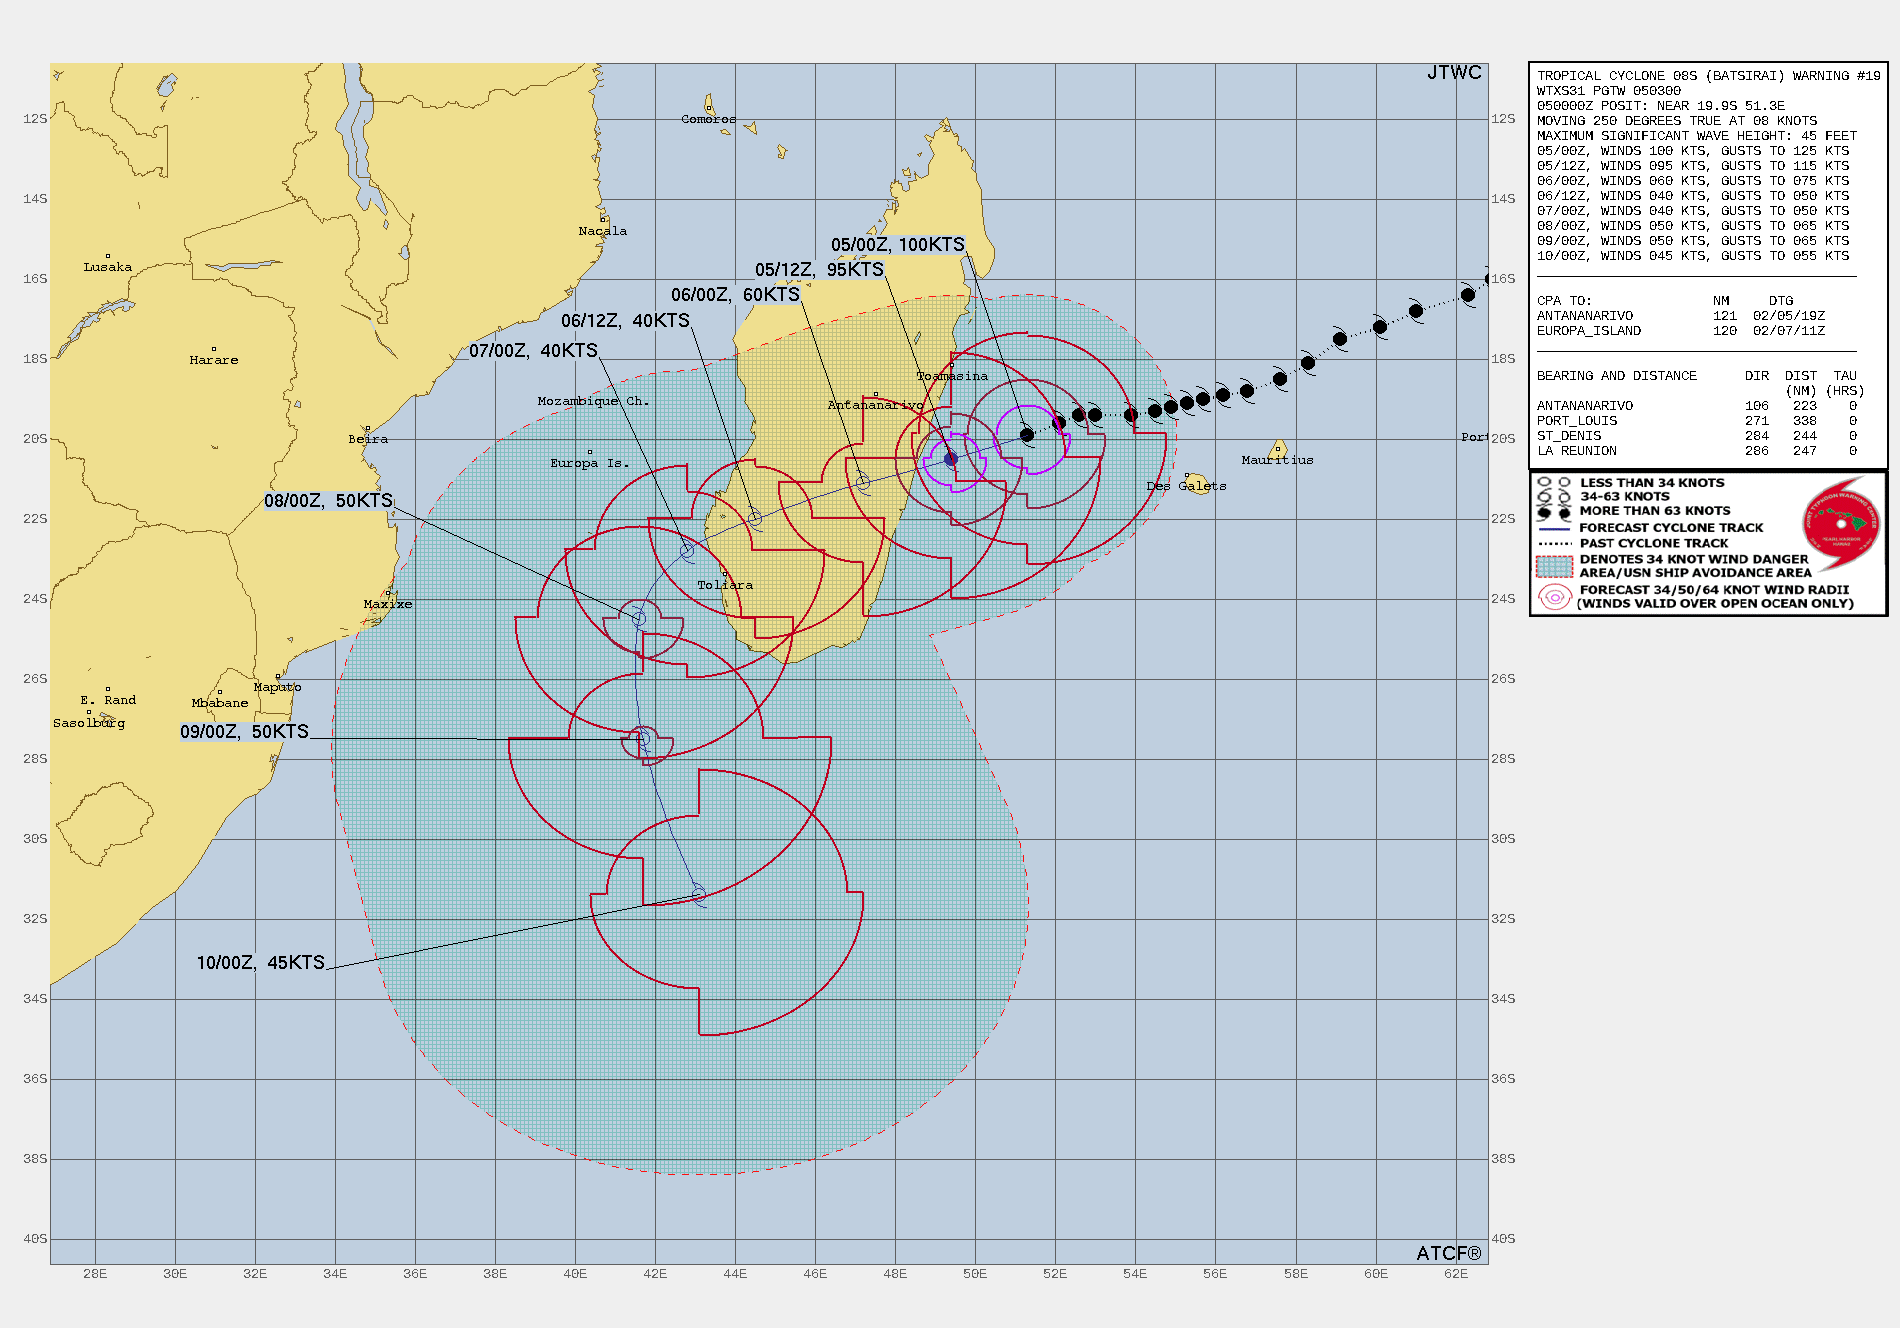 FORECAST REASONING.  SIGNIFICANT FORECAST CHANGES: THERE ARE NO SIGNIFICANT CHANGES TO THE FORECAST FROM THE PREVIOUS WARNING.  FORECAST DISCUSSION: TROPICAL CYCLONE 08S (BATSIRAI) IS EXPECTED TO MAKE LANDFALL IN SOUTHERN MADAGASCAR BETWEEN 12 AND 24 HOURS. WHILE THE ENVIRONMENT IS GENERALLY FAVORABLE, THE IMPERFECT STRUCTURE OF THE INNER CORE AND THE LIKELY ENTRAINMENT OF DRY AIR IN THE NORTHERN SEMICIRCLE SHOULD PREVENT ANY INTENSIFICATION PRIOR TO LANDFALL, AND IN FACT SLIGHT WEAKENING IS POSSIBLE GIVEN CURRENT SATELLITE TRENDS. BATSIRAI IS BEING STEERED WEST-SOUTHWESTWARD BY THE SUBTROPICAL RIDGE TO THE SOUTH, AND THIS TRACK WILL TAKE THE STORM ACROSS MADAGASCAR AND INTO THE MOZAMBIQUE CHANNEL BY 48 HOURS. THE INTENSITY WILL BE GREATLY REDUCED BY THIS TIME DUE TO THE CROSSING OF MOUNTAINOUS TERRAIN, AROUND 40 KT. AROUND THE TIME OF REEMERGENCE OVER WATER, THE SUBTROPICAL RIDGE IS EXPECTED TO WEAKEN AS AN UPPER-LEVEL TROUGH SKIRTS BY TO THE SOUTH, RESULTING IN BATSIRAI TURNING SOUTHWARD. THE CYCLONE WILL HAVE 24-48 HOURS OF TIME OVER WARM WATER BEFORE SEA SURFACE TEMPERATURES RAPIDLY DROP TO BELOW 26 DEGREES CELSIUS BY AROUND 96 HOURS. DURING THIS PERIOD, SOME REINTENSIFICATION IS LIKELY. HOWEVER, THE REINTENSIFICATION IS LIKELY TO BE MUTED DUE TO A COUPLE OF FACTORS. FIRSTLY, THE UPPER-LEVEL ANTICYCLONE IS FORECAST TO REMAIN ANCHORED EAST OF MADAGASCAR, IMPARTING MODERATE NORTHERLY SHEAR OF 15-20 KT ON THE CYCLONE. THIS IS EXPECTED TO PUSH A PREEXISTING MID-LEVEL DRY AIR MASS IN THE MOZAMBIQUE CHANNEL INTO THE NORTHERN SEMICIRCLE OF BATSIRAI, LEADING TO EROSION OF PART OF THE INNER CORE. SECONDLY, MODELS CURRENTLY AGREE THAT THE VORTEX STRUCTURE FOLLOWING THE CROSSING OF MADAGASCAR WILL BE RATHER BROAD, WHICH WOULD NOT FACILITATE RAPID INTENSIFICATION. THE JTWC FORECAST CALLS FOR A SECONDARY PEAK OF 50 KT IN 72-96 HOURS, WHICH IS SLIGHTLY ABOVE THE MULTI-MODEL CONSENSUS. AFTER 96 HOURS, AS THE CYCLONE MOVES OVER COLDER WATERS, CONVECTION IS LIKELY TO DWINDLE, LEADING TO THE ONSET OF SUBTROPICAL TRANSITION BY 120 HOURS.